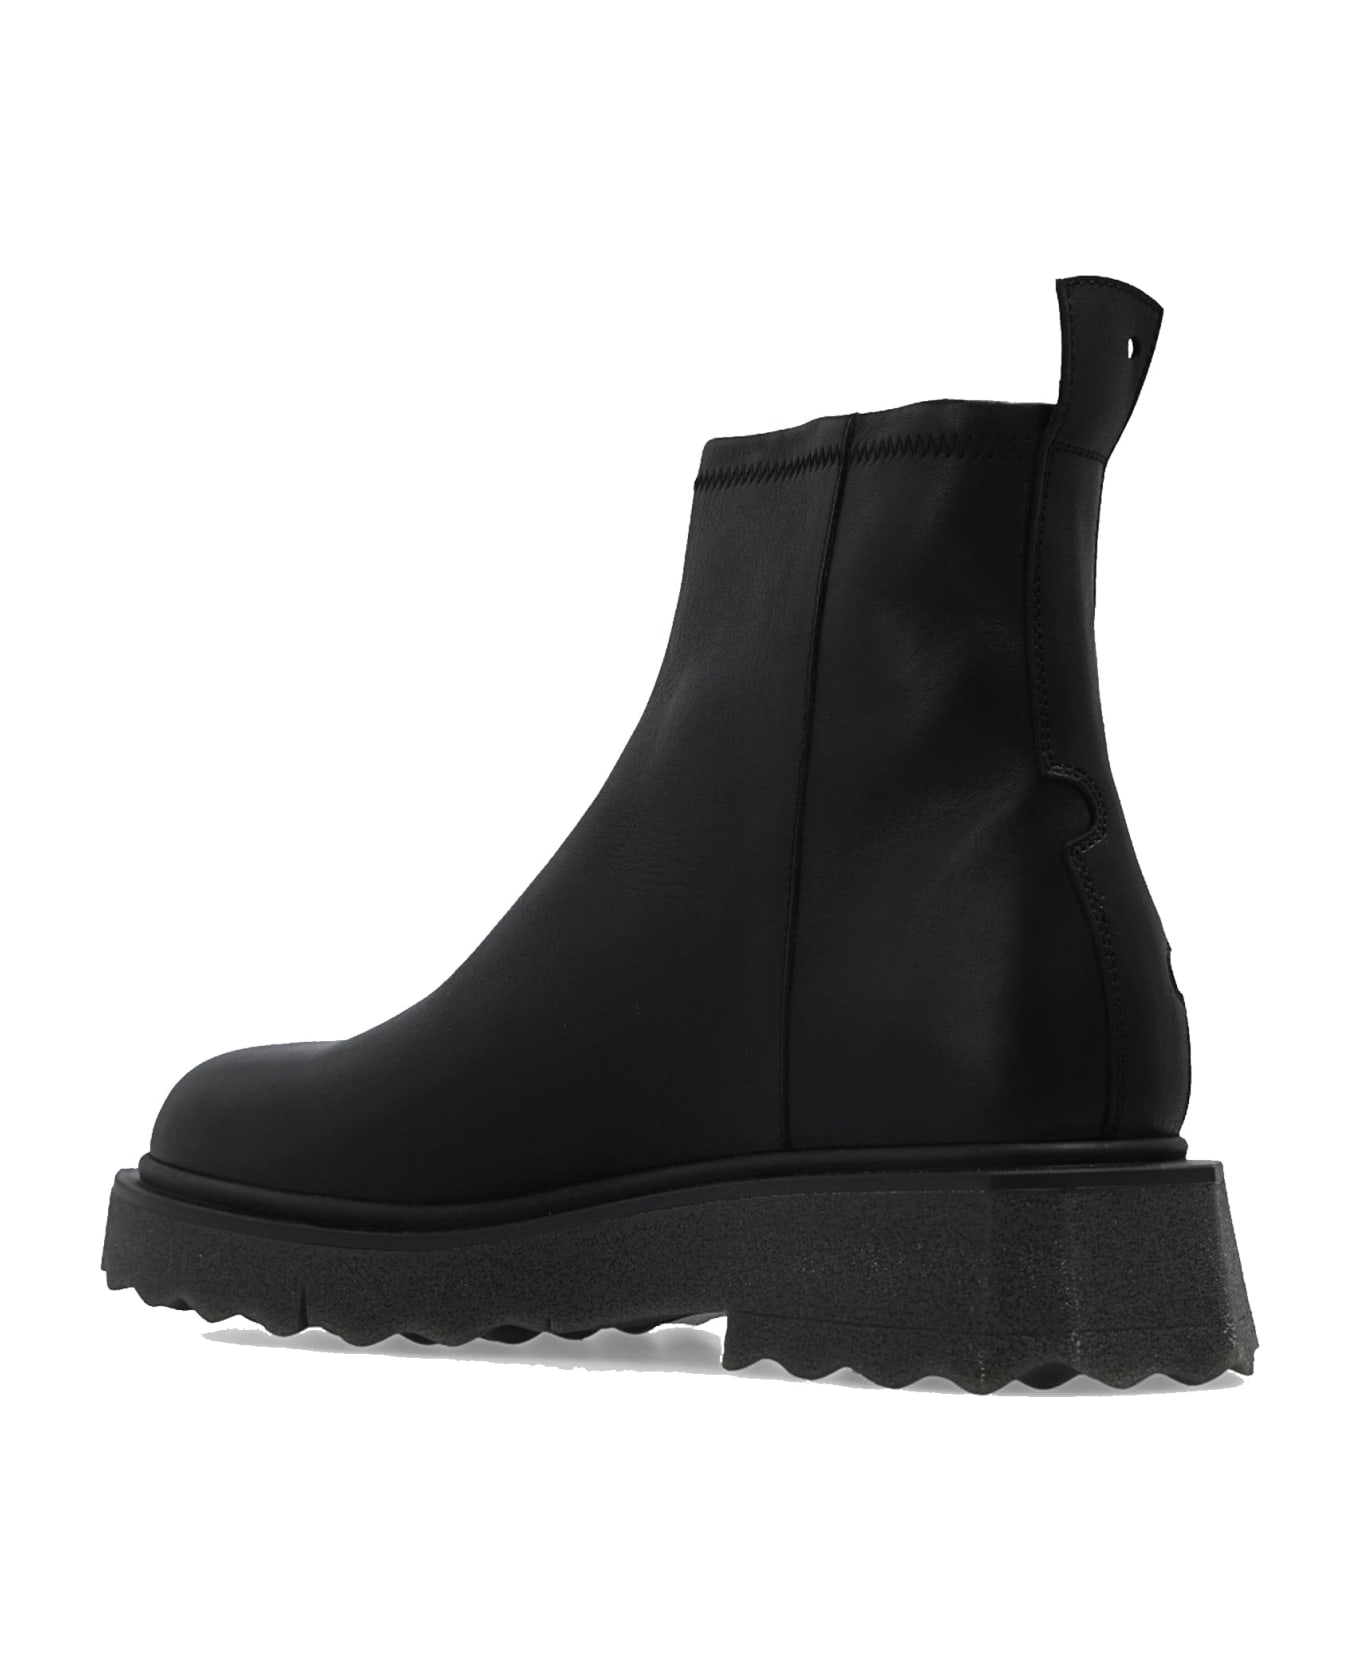 Off-White Ankle Leather Boots - Black